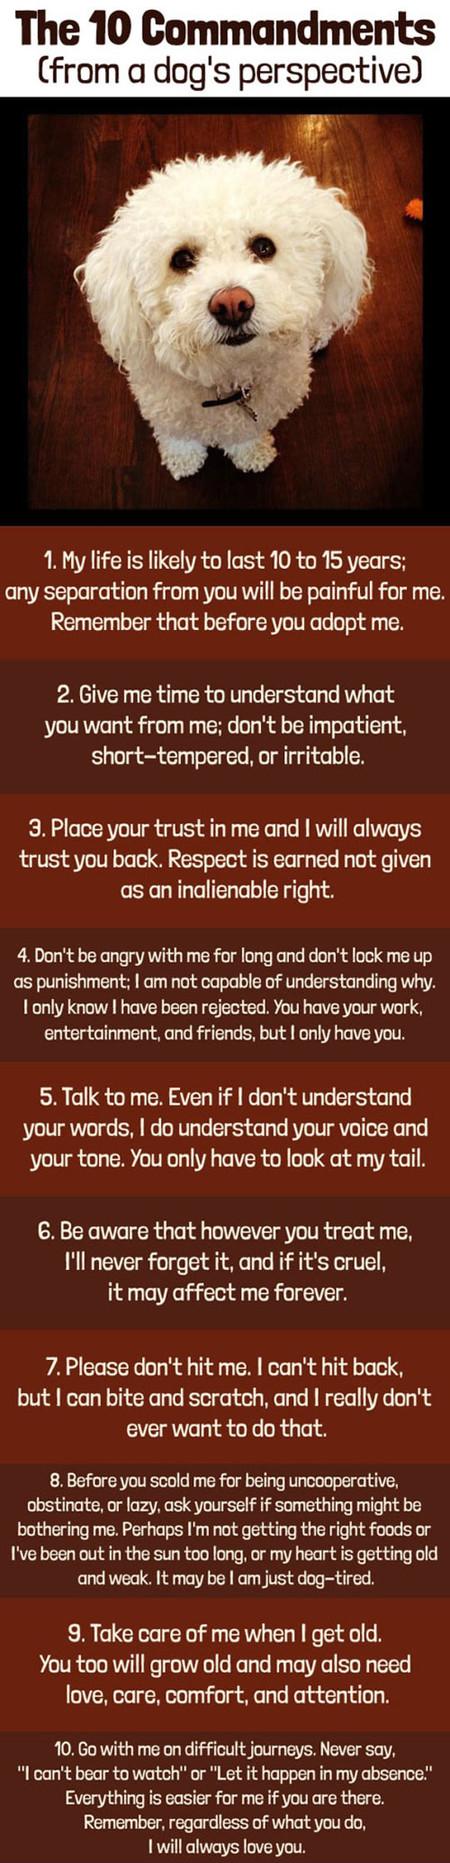 The 10 Commandments From A Dog's Perspective